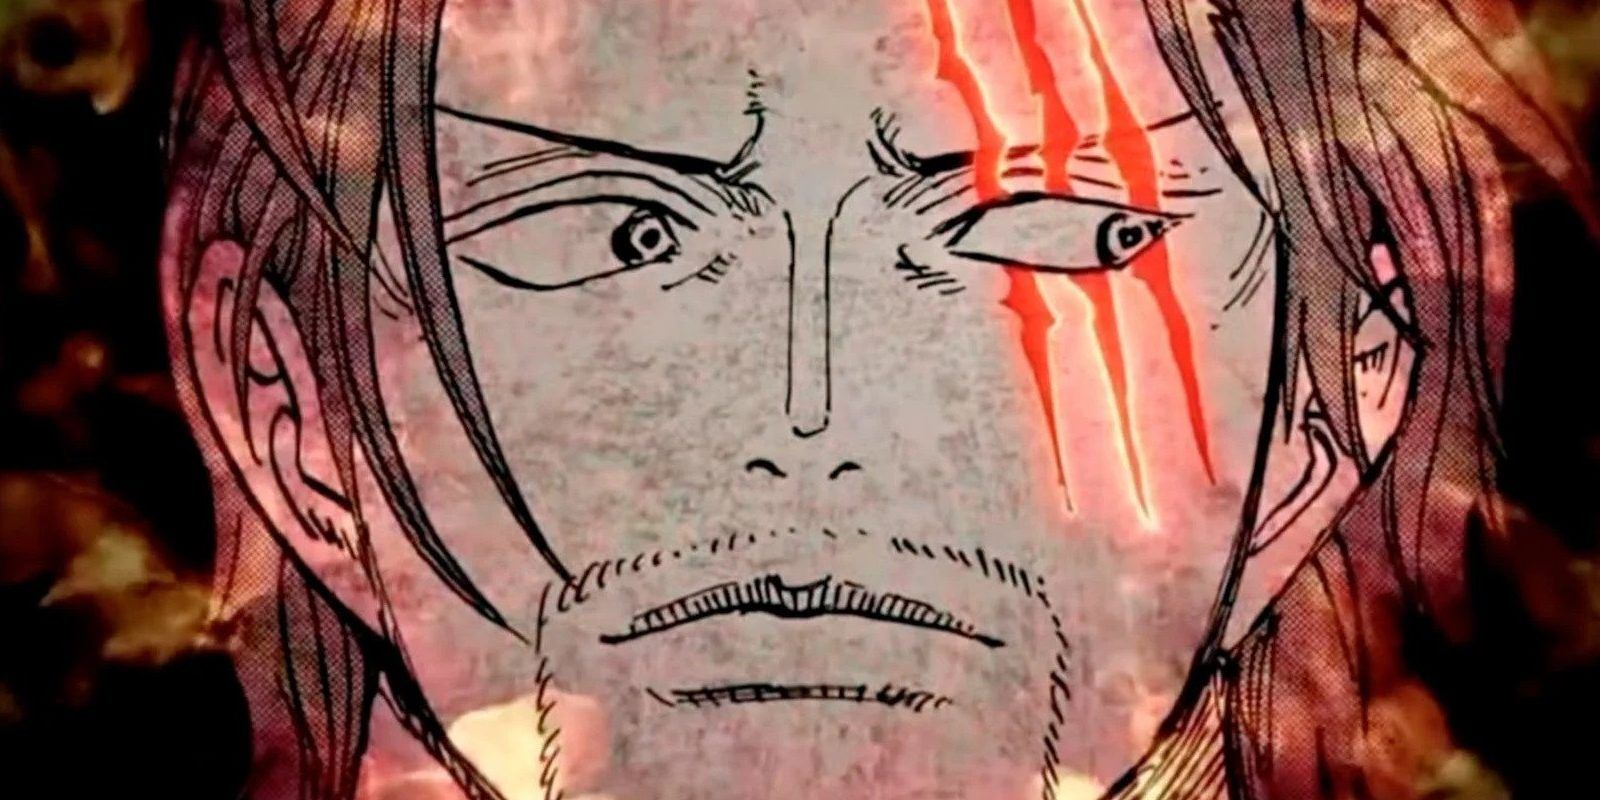 A close-up of Shanks giving side eye in One Piece.